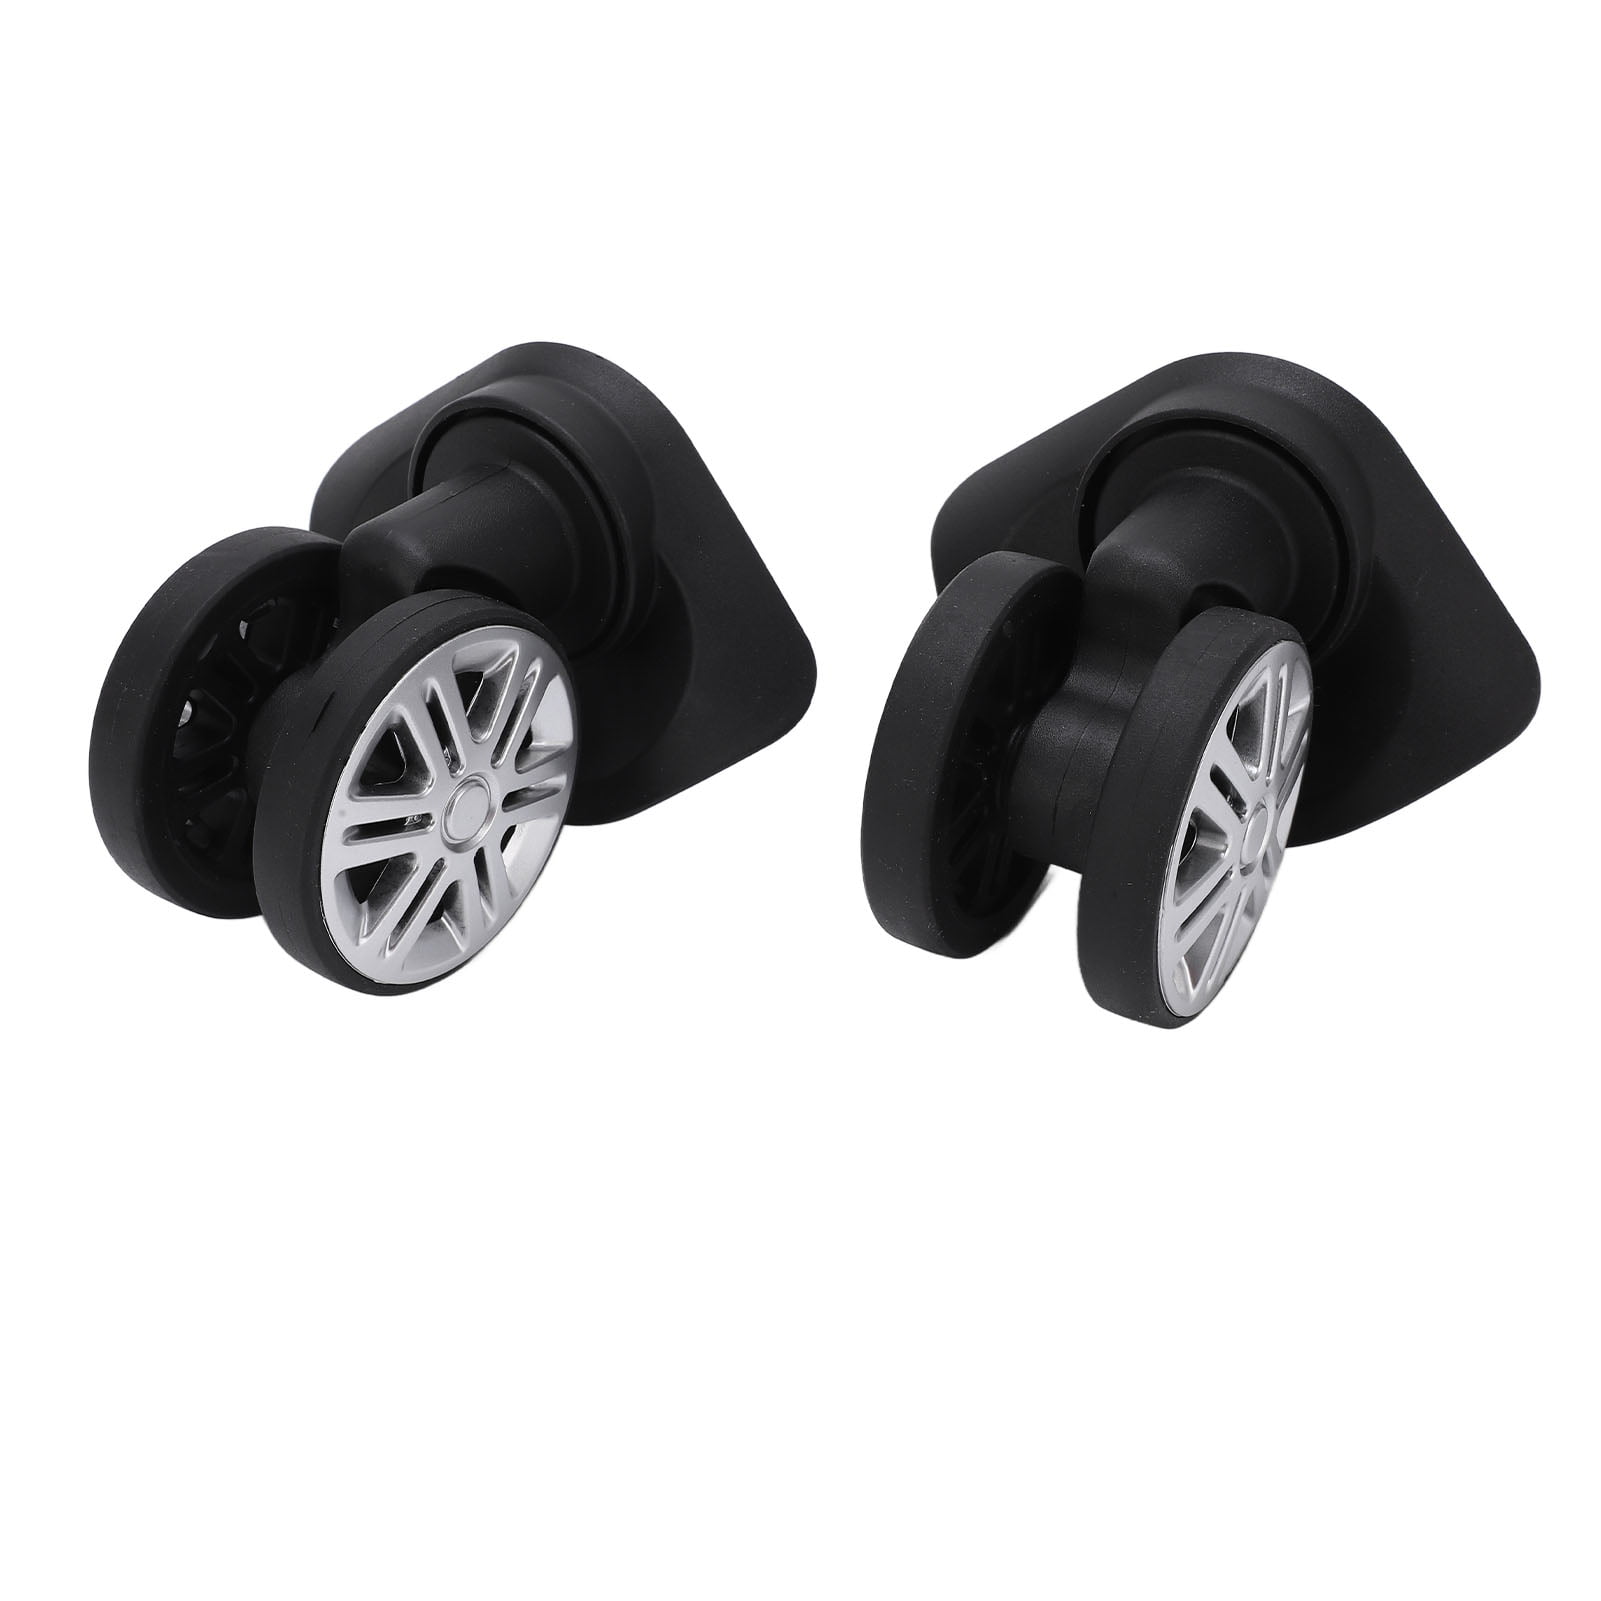 Rhinenet Luggage Suitcase Wheels Replacement Swivel Universal Trolley Wheel 2 Sets of Casters 55mmx15mmx6mm